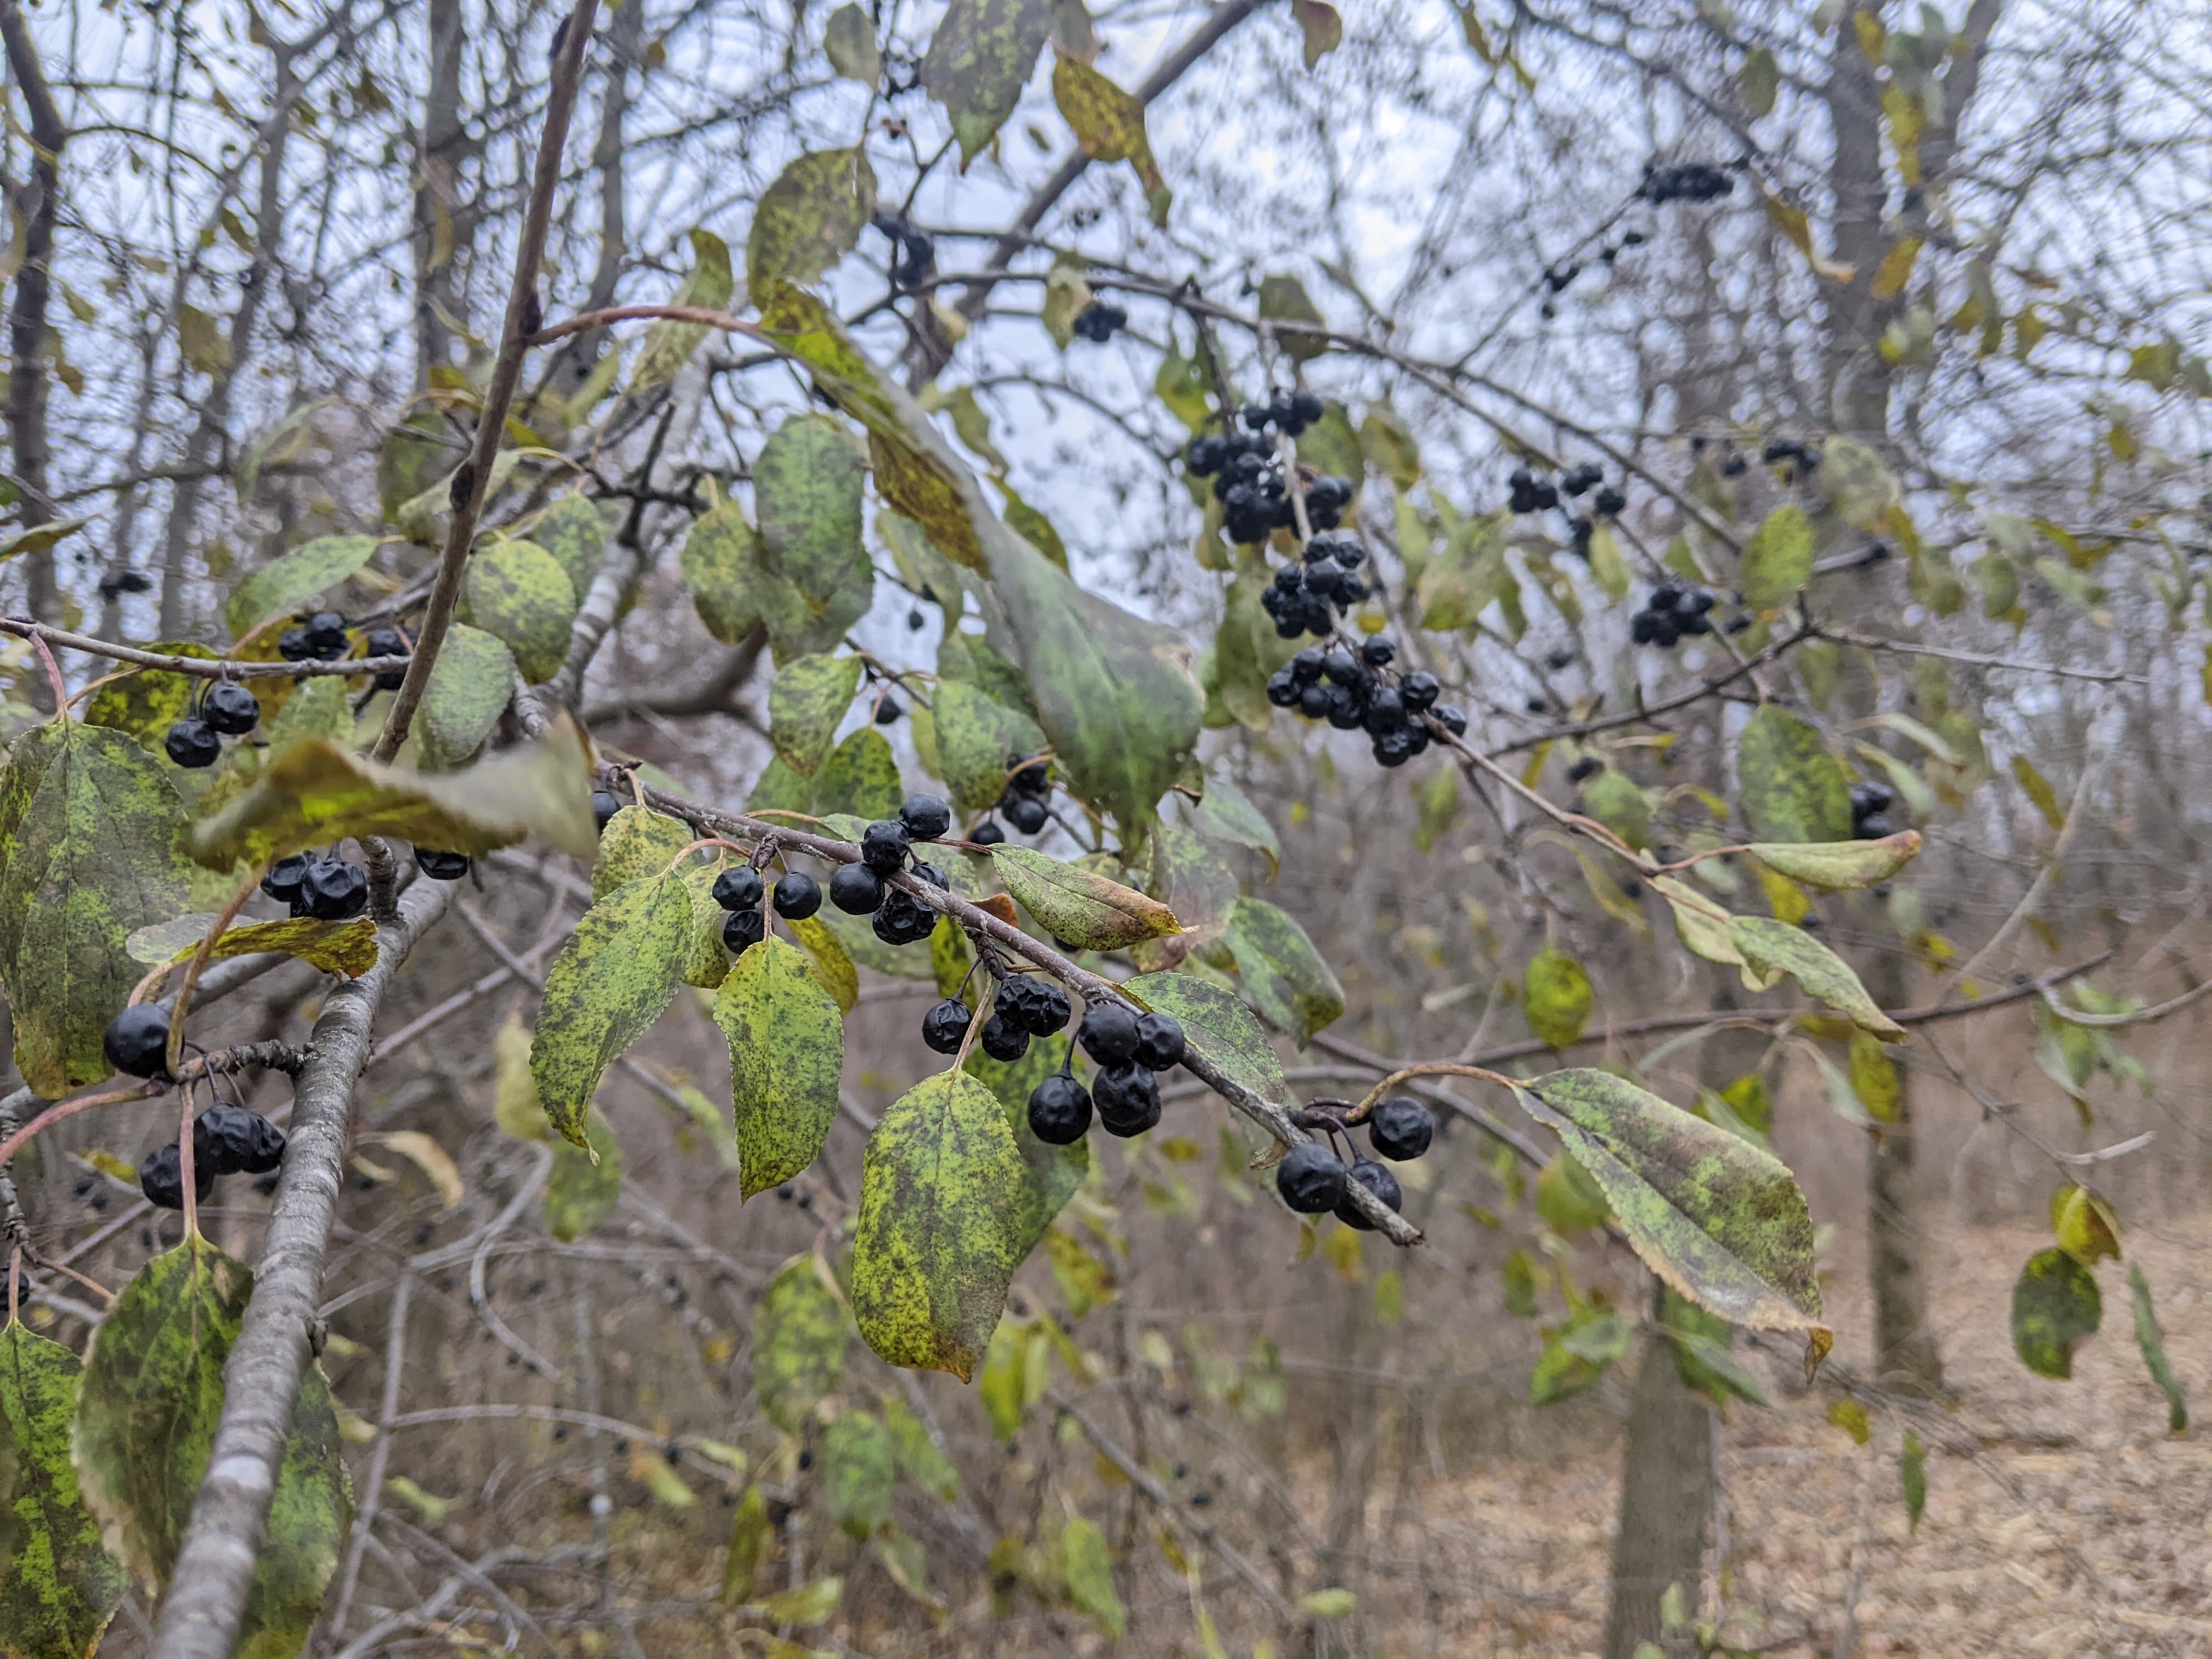 Buckthorn berries and green leaves in winter forest